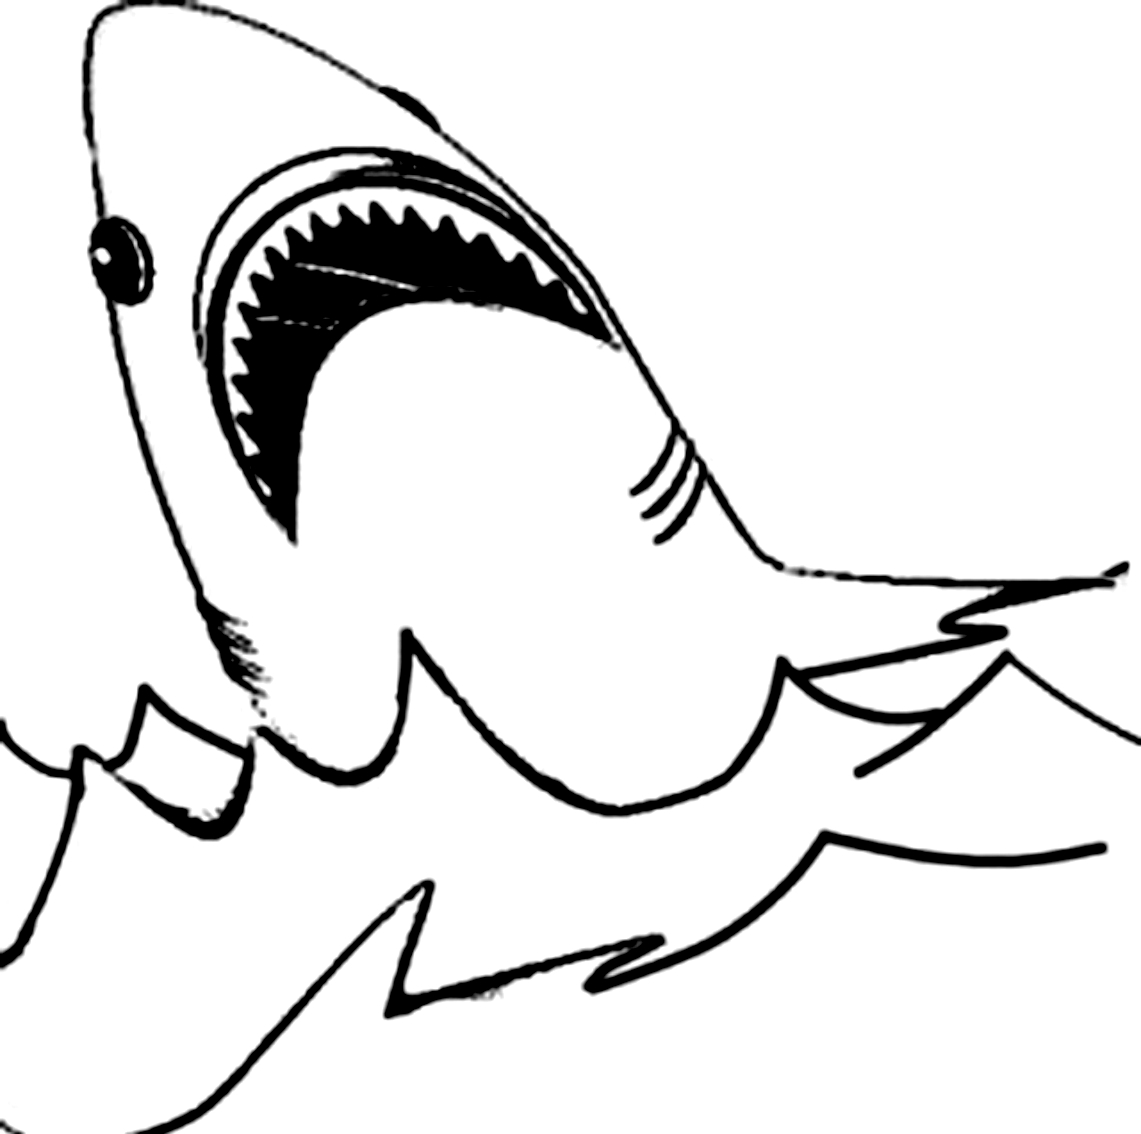 Drawing 14 of sharks to print and color